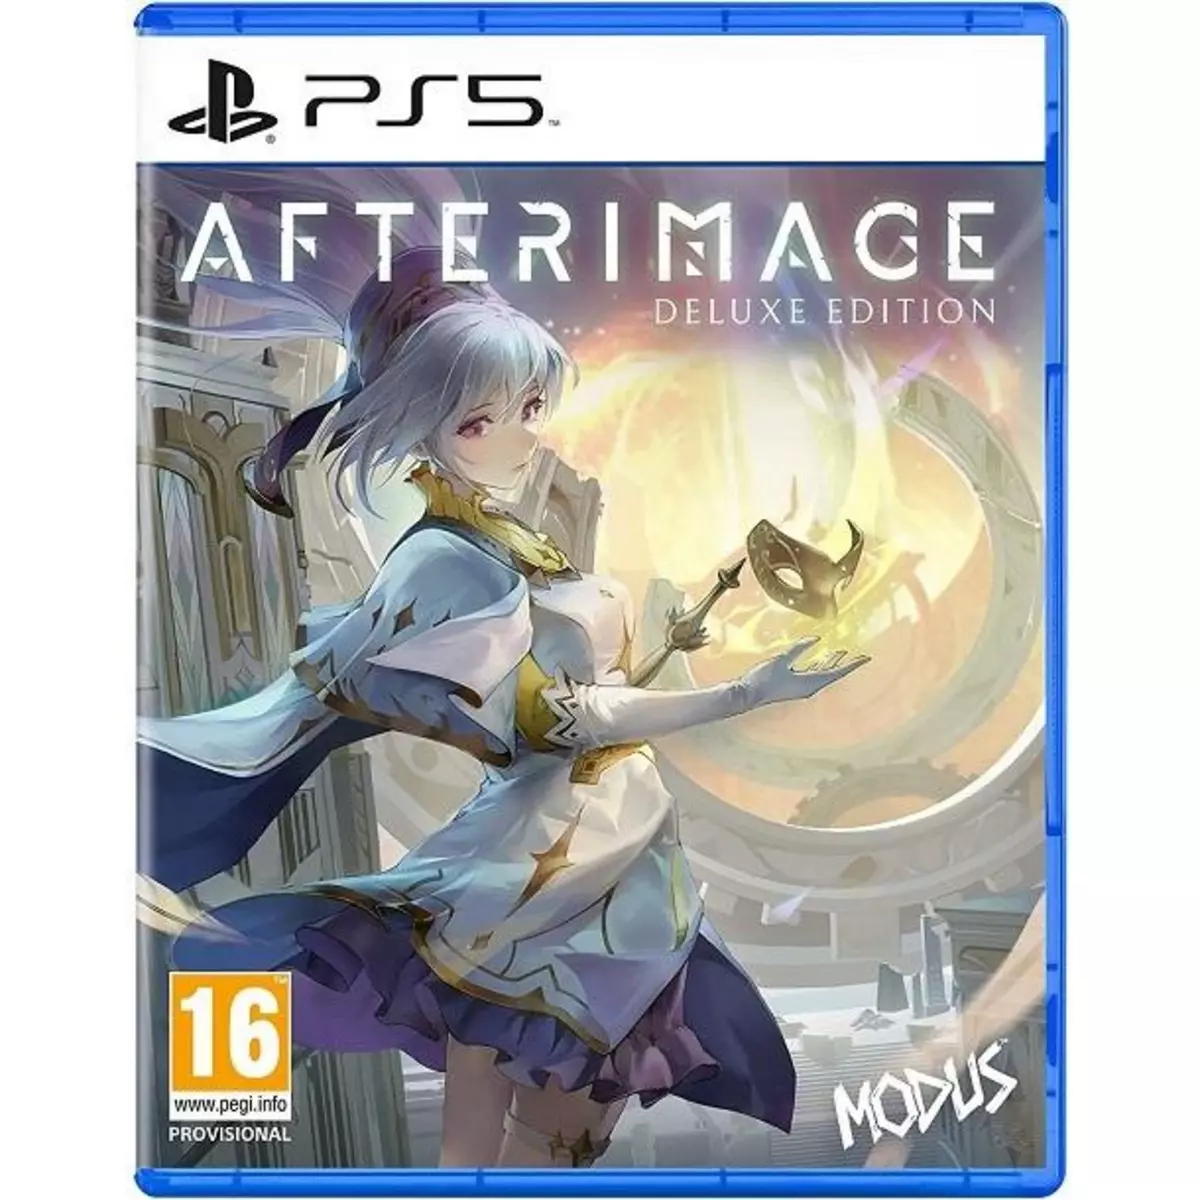  Afterimage Deluxe Edition PS5